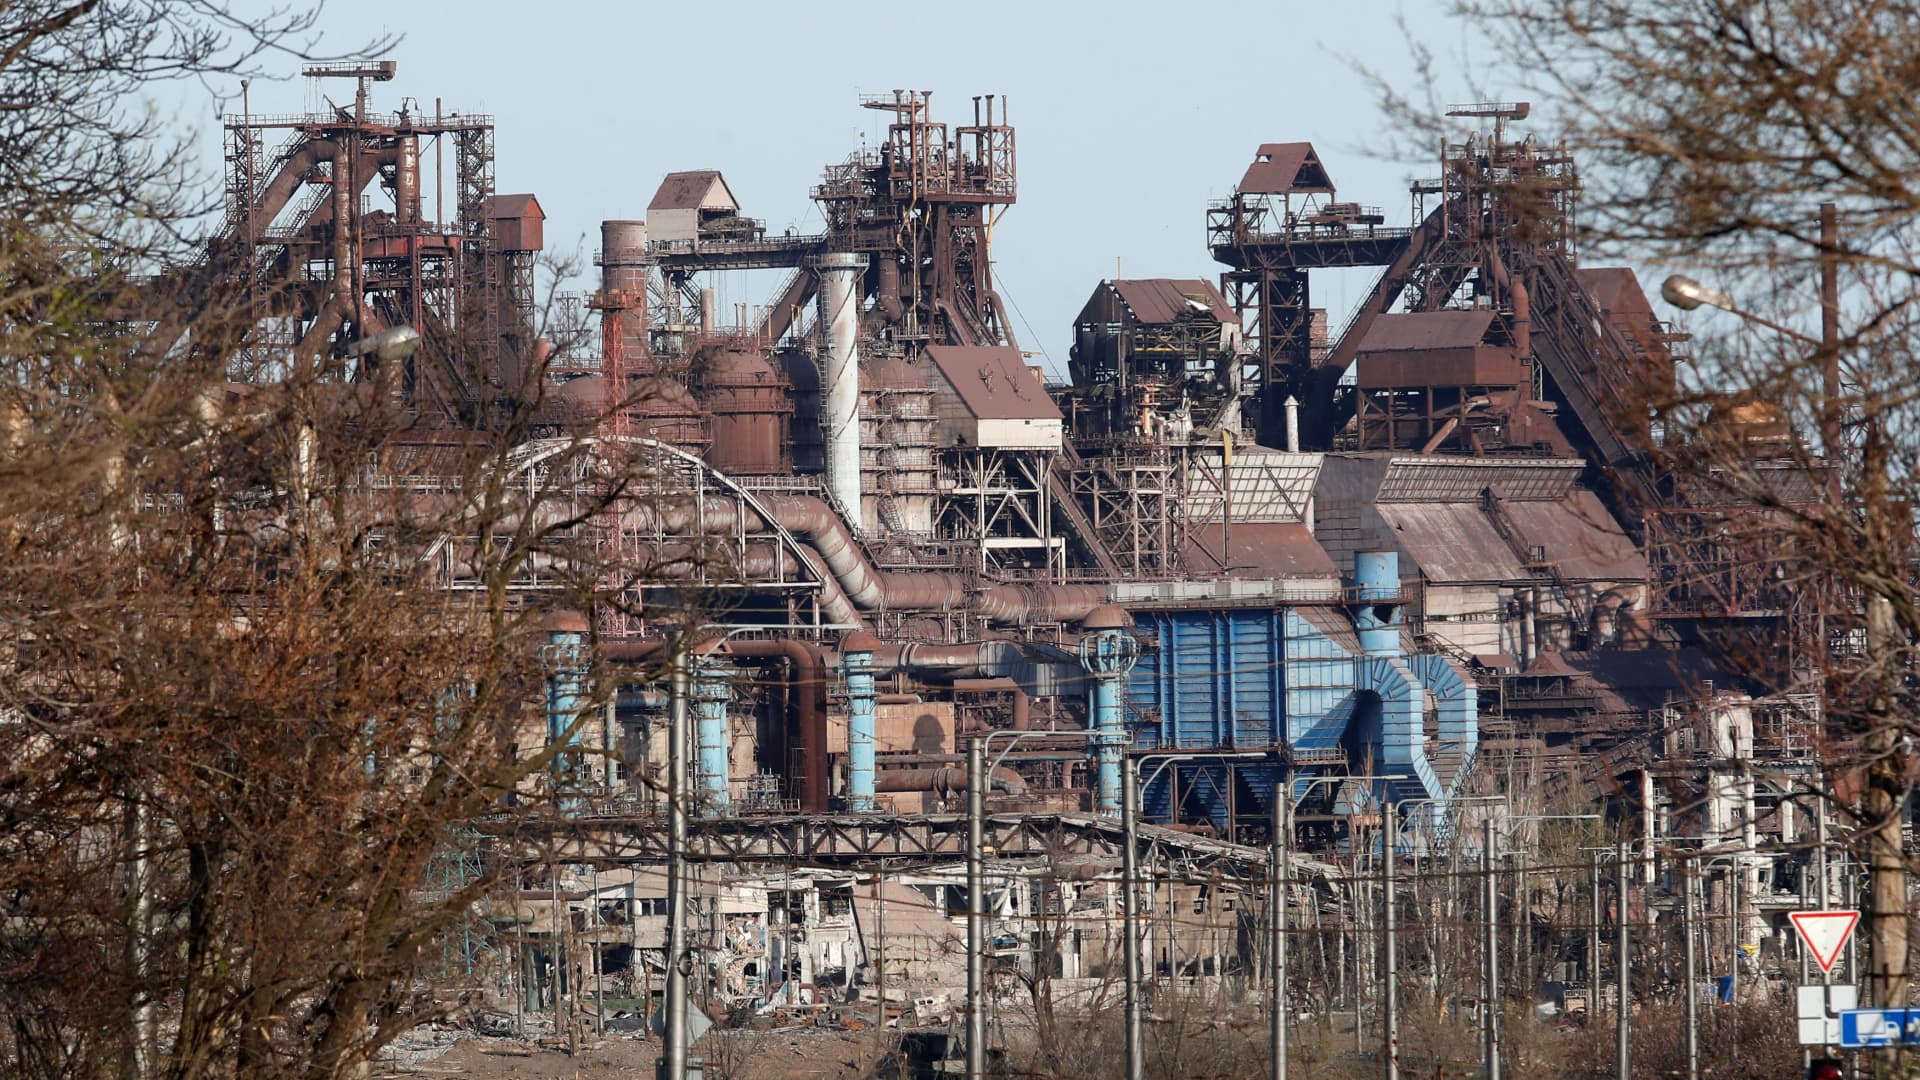 A view shows a plant of Azovstal Iron and Steel Works during Ukraine-Russia conflict in the southern port city of Mariupol, Ukraine April 26, 2022.